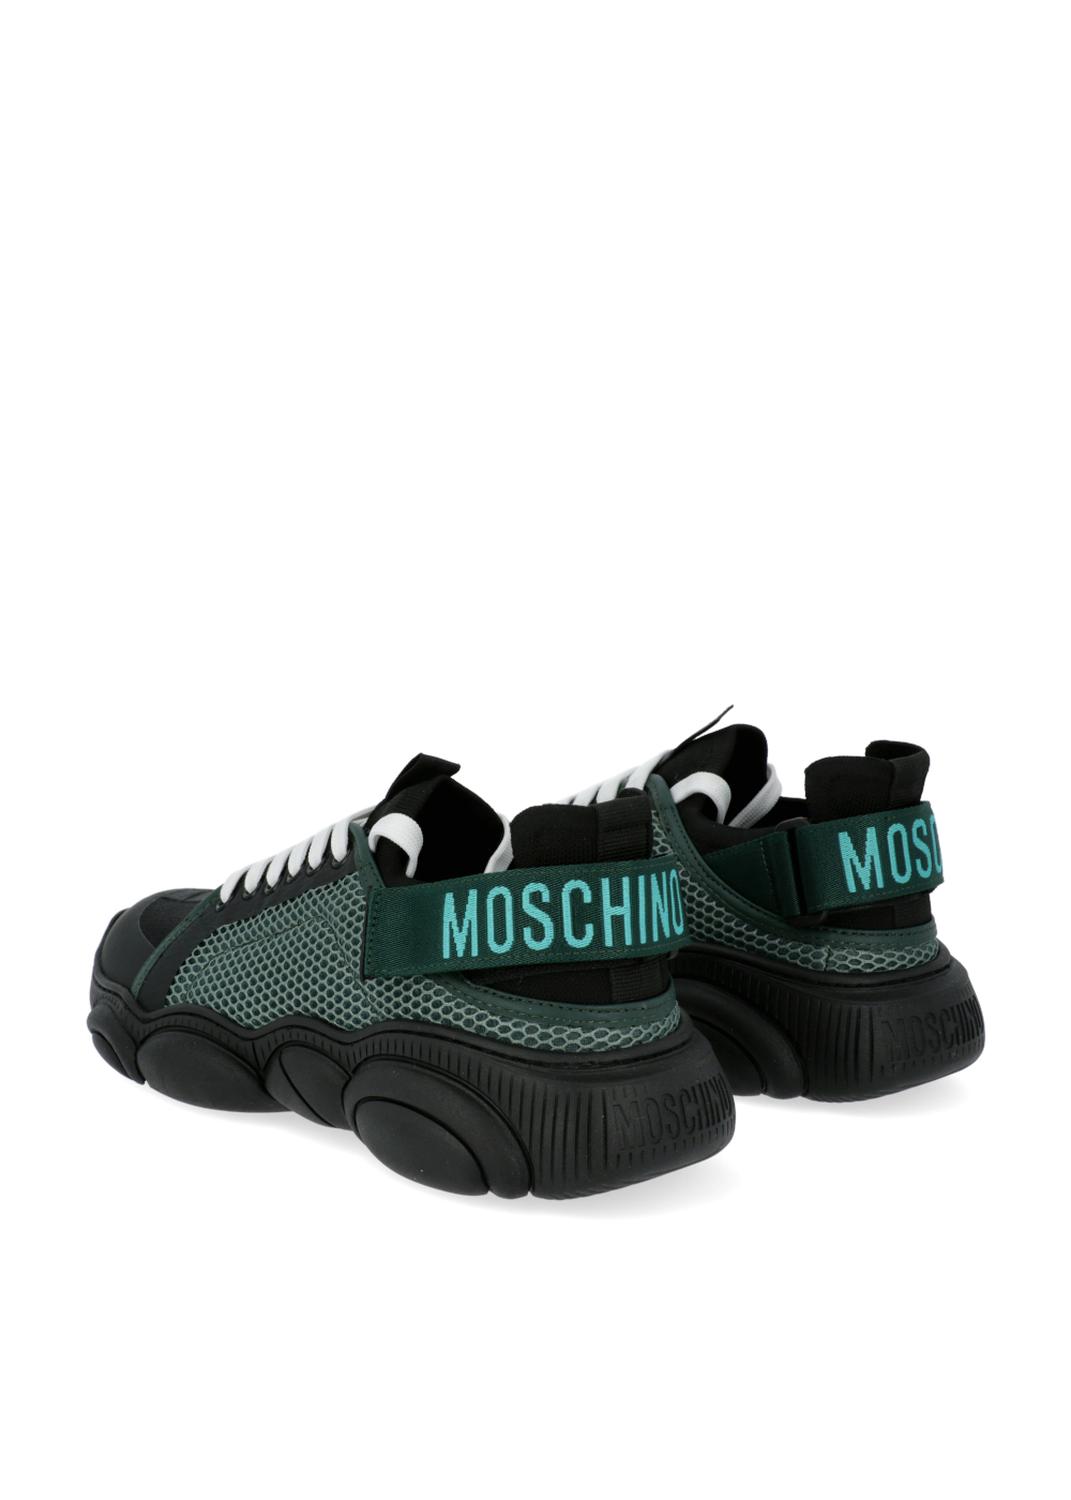 Moschino tenis Bubble Teddy para hombre MSC-MB15353 - LOUDER Lifestyle